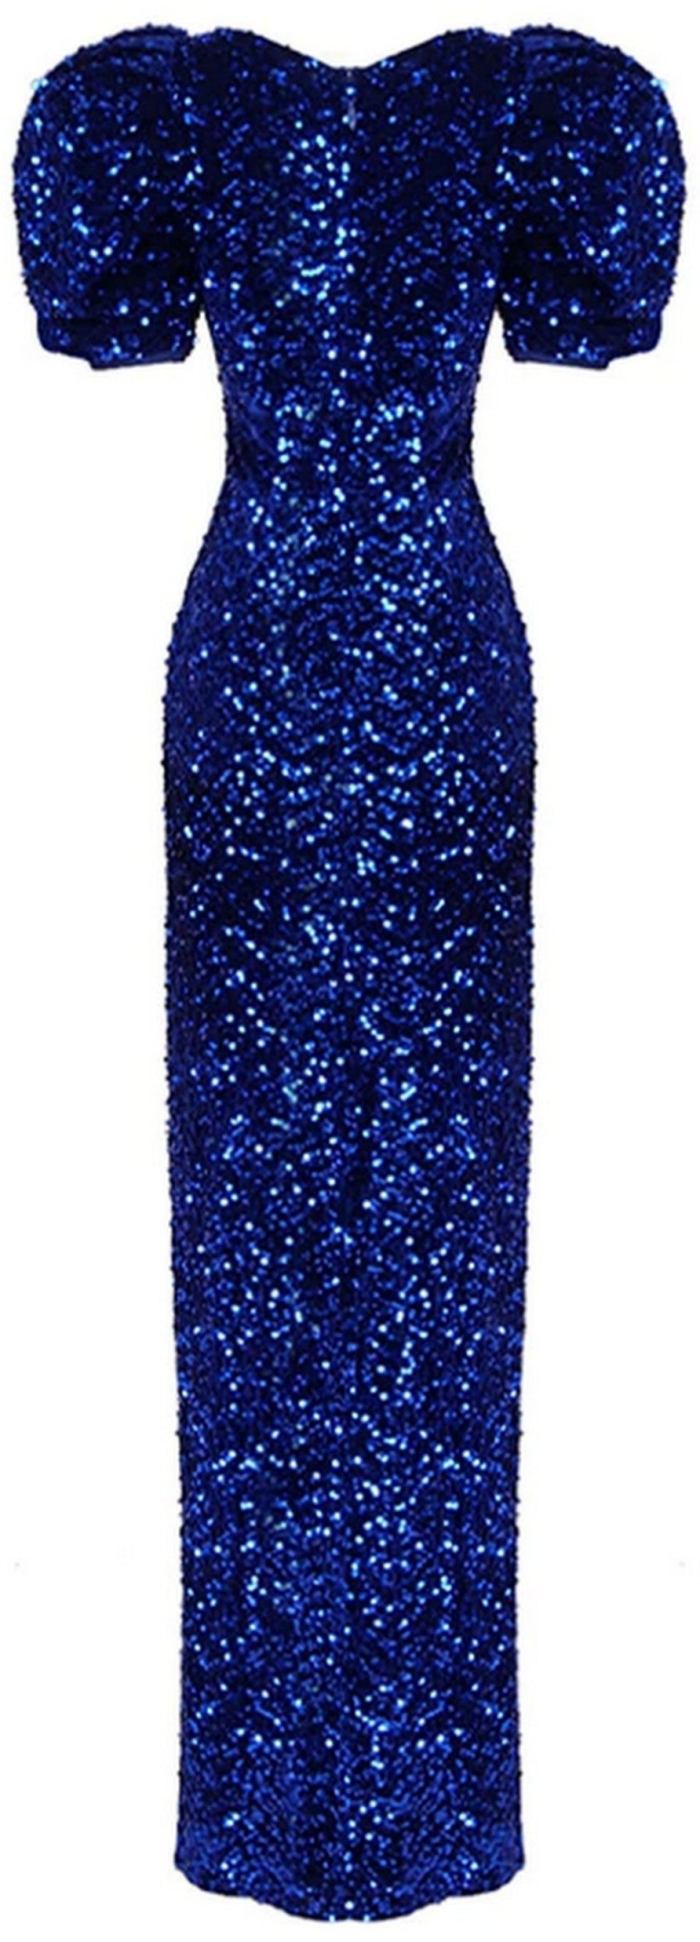 Sequin-Embellished Long Puff-Sleeve Dress in Blue Inspired Fashions Boutique